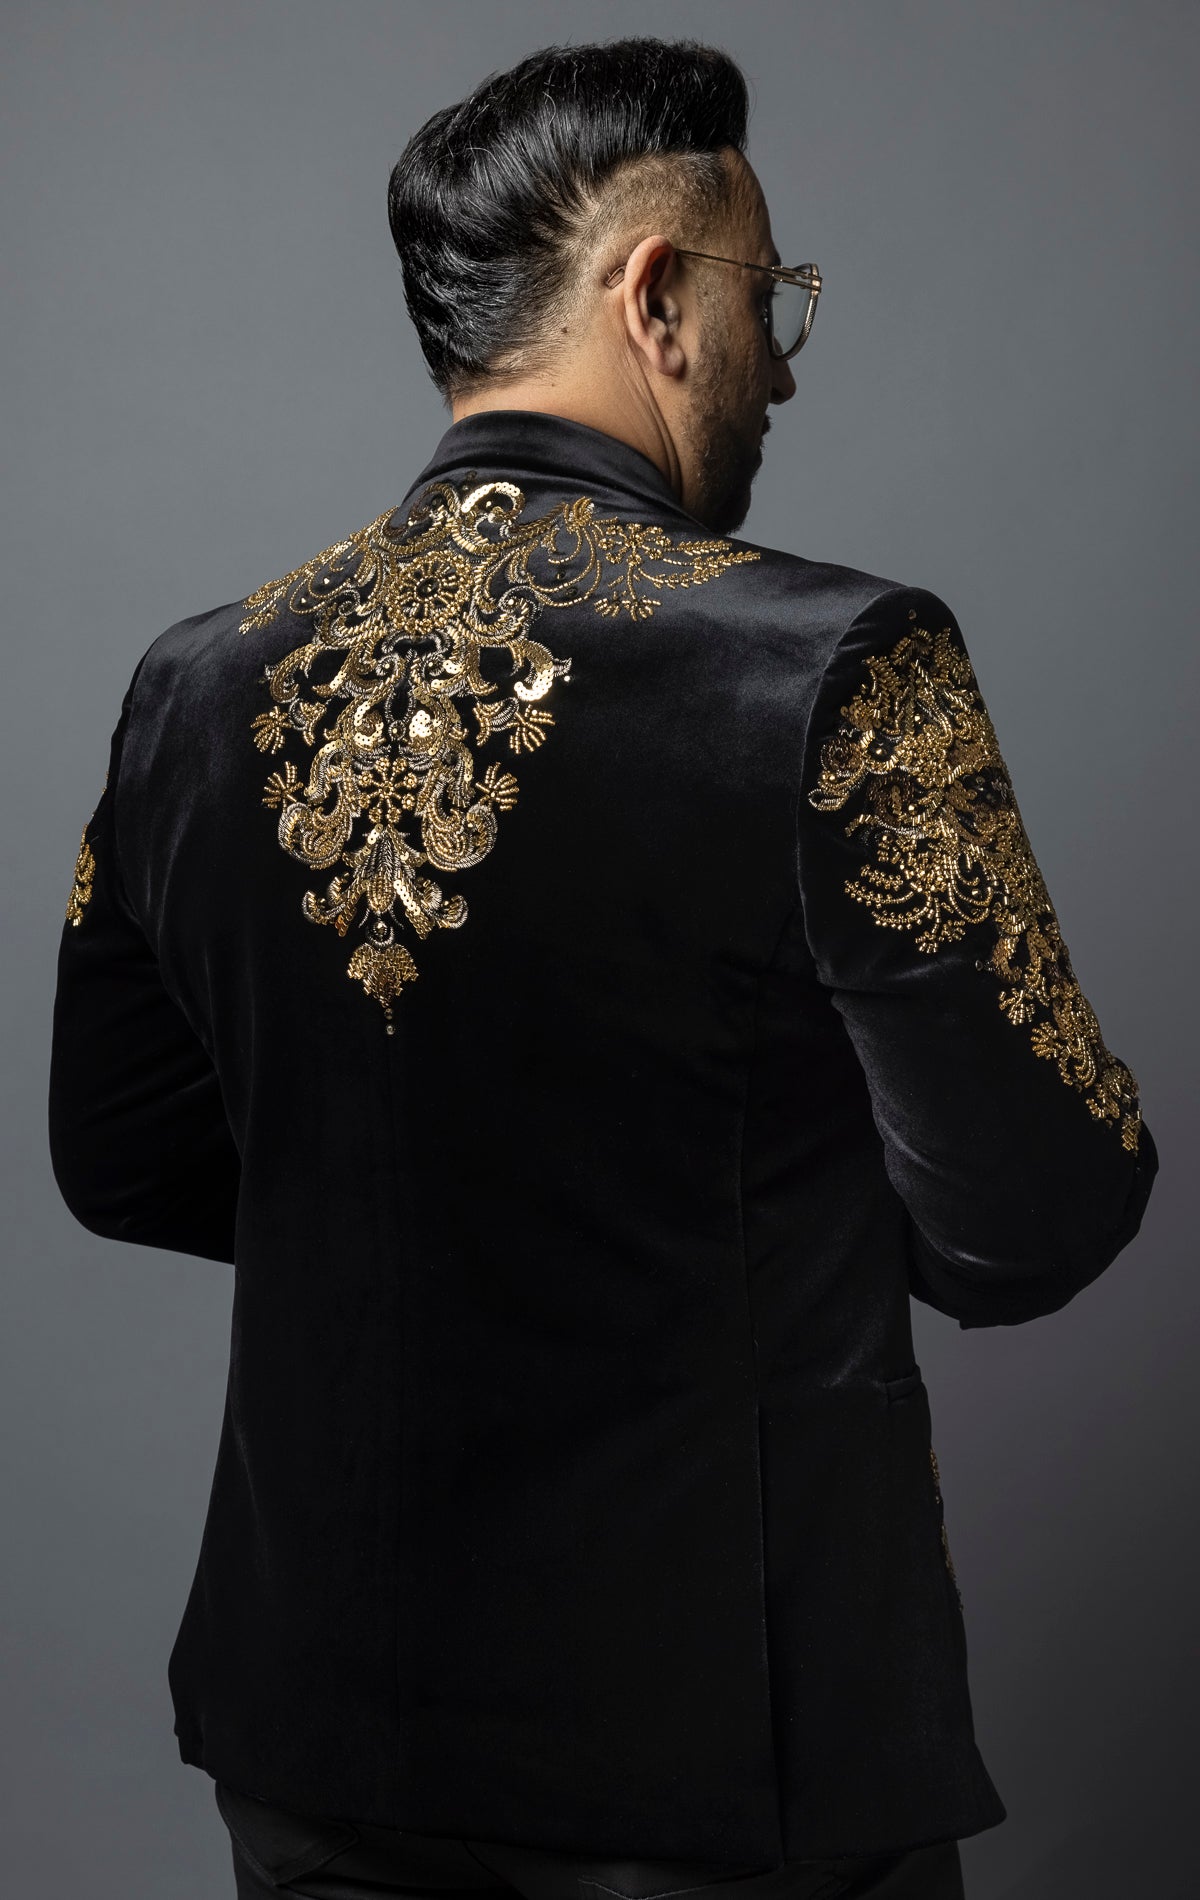 Luxury black blazer boasts gold Sequin and Beads, Velvet design, as well as a peak lapel collar and long sleeves